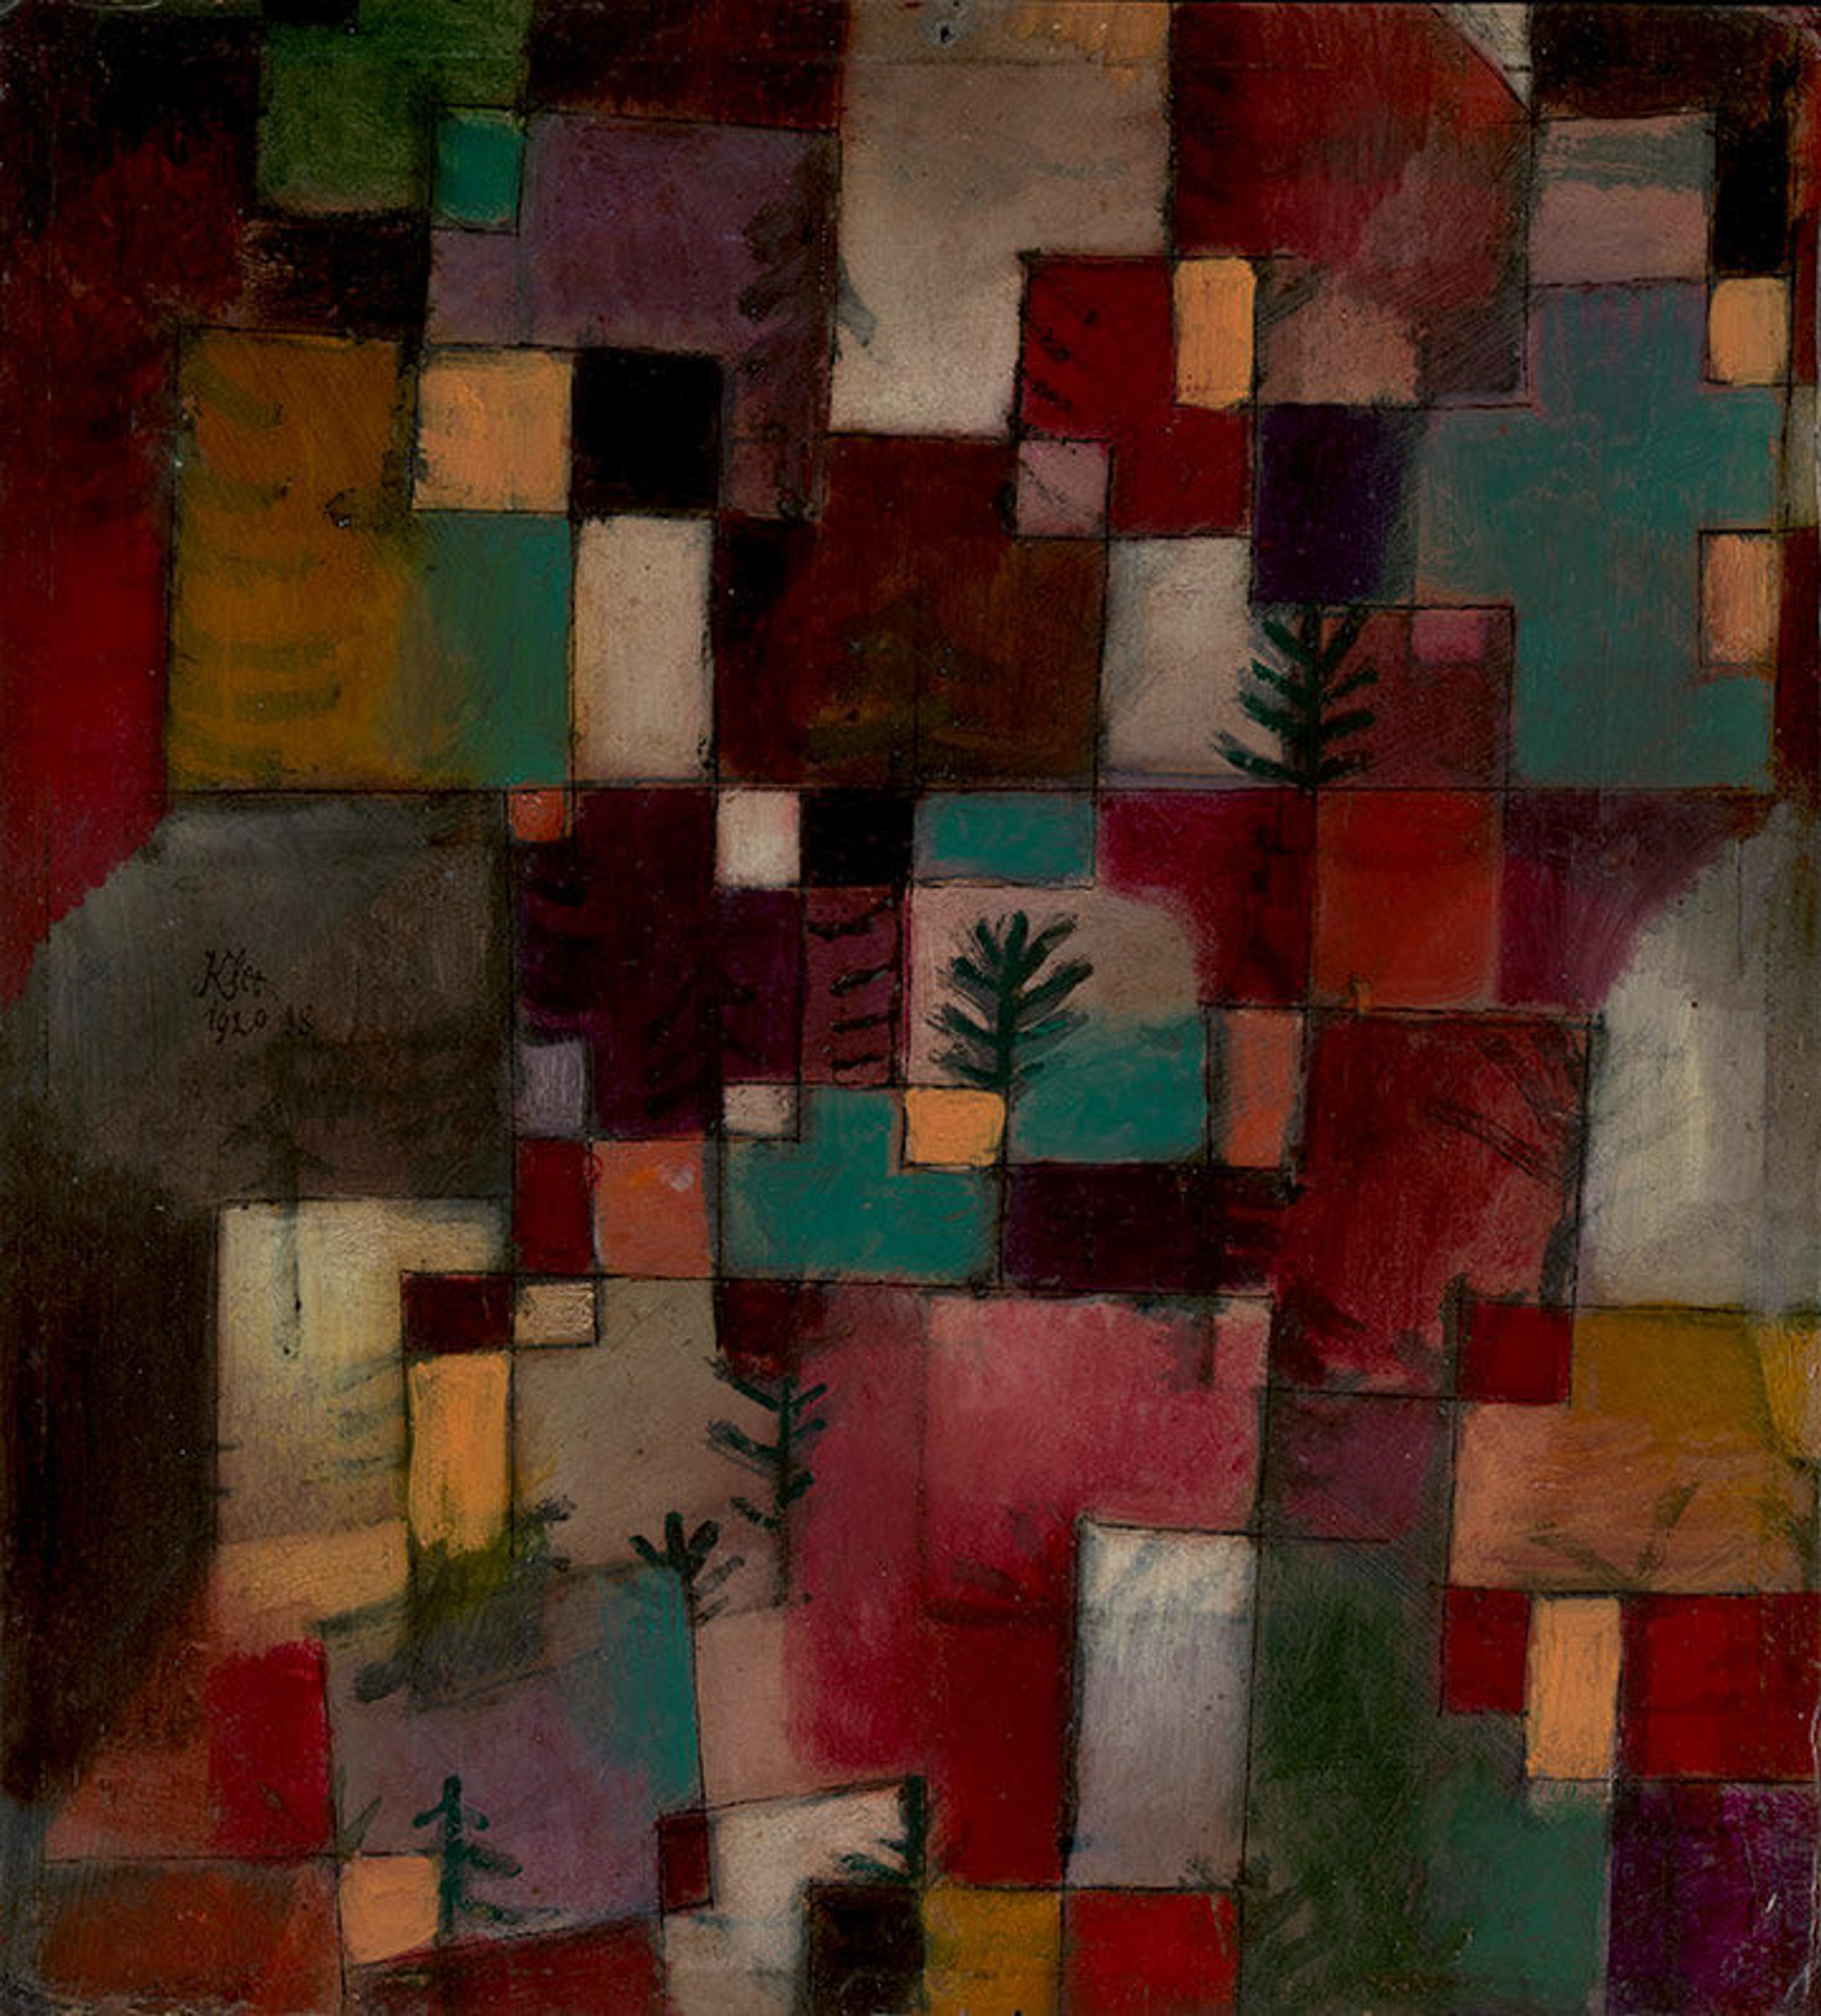 Paul Klee's painting Redgreen and Violet-Yellow Rhythms